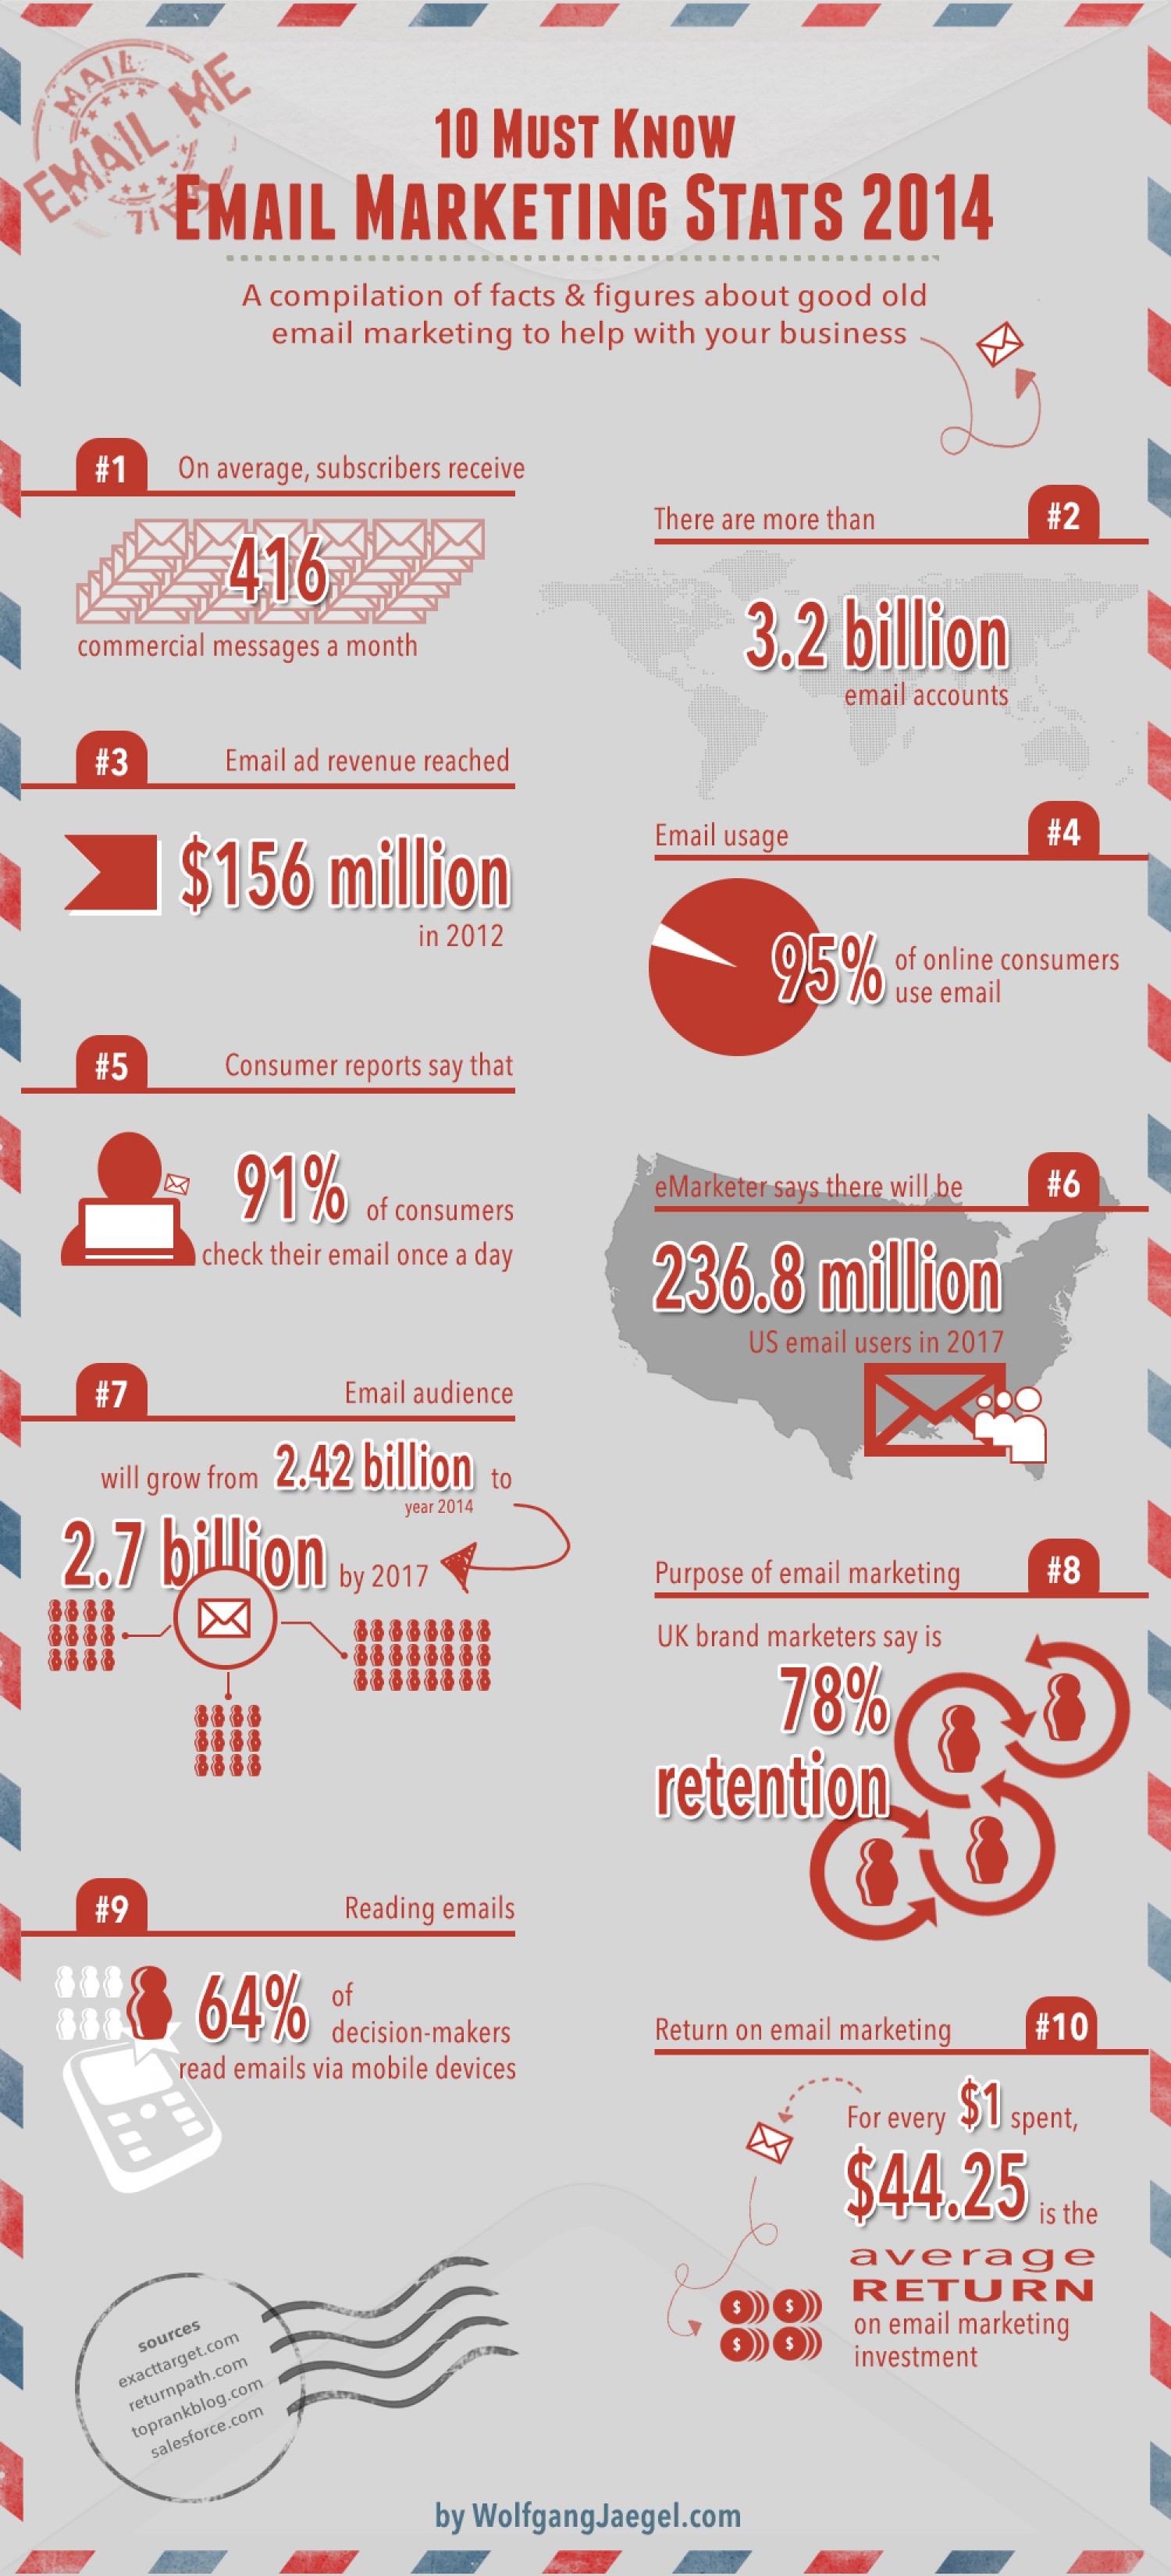 10 must-know email marketing stats 2014 